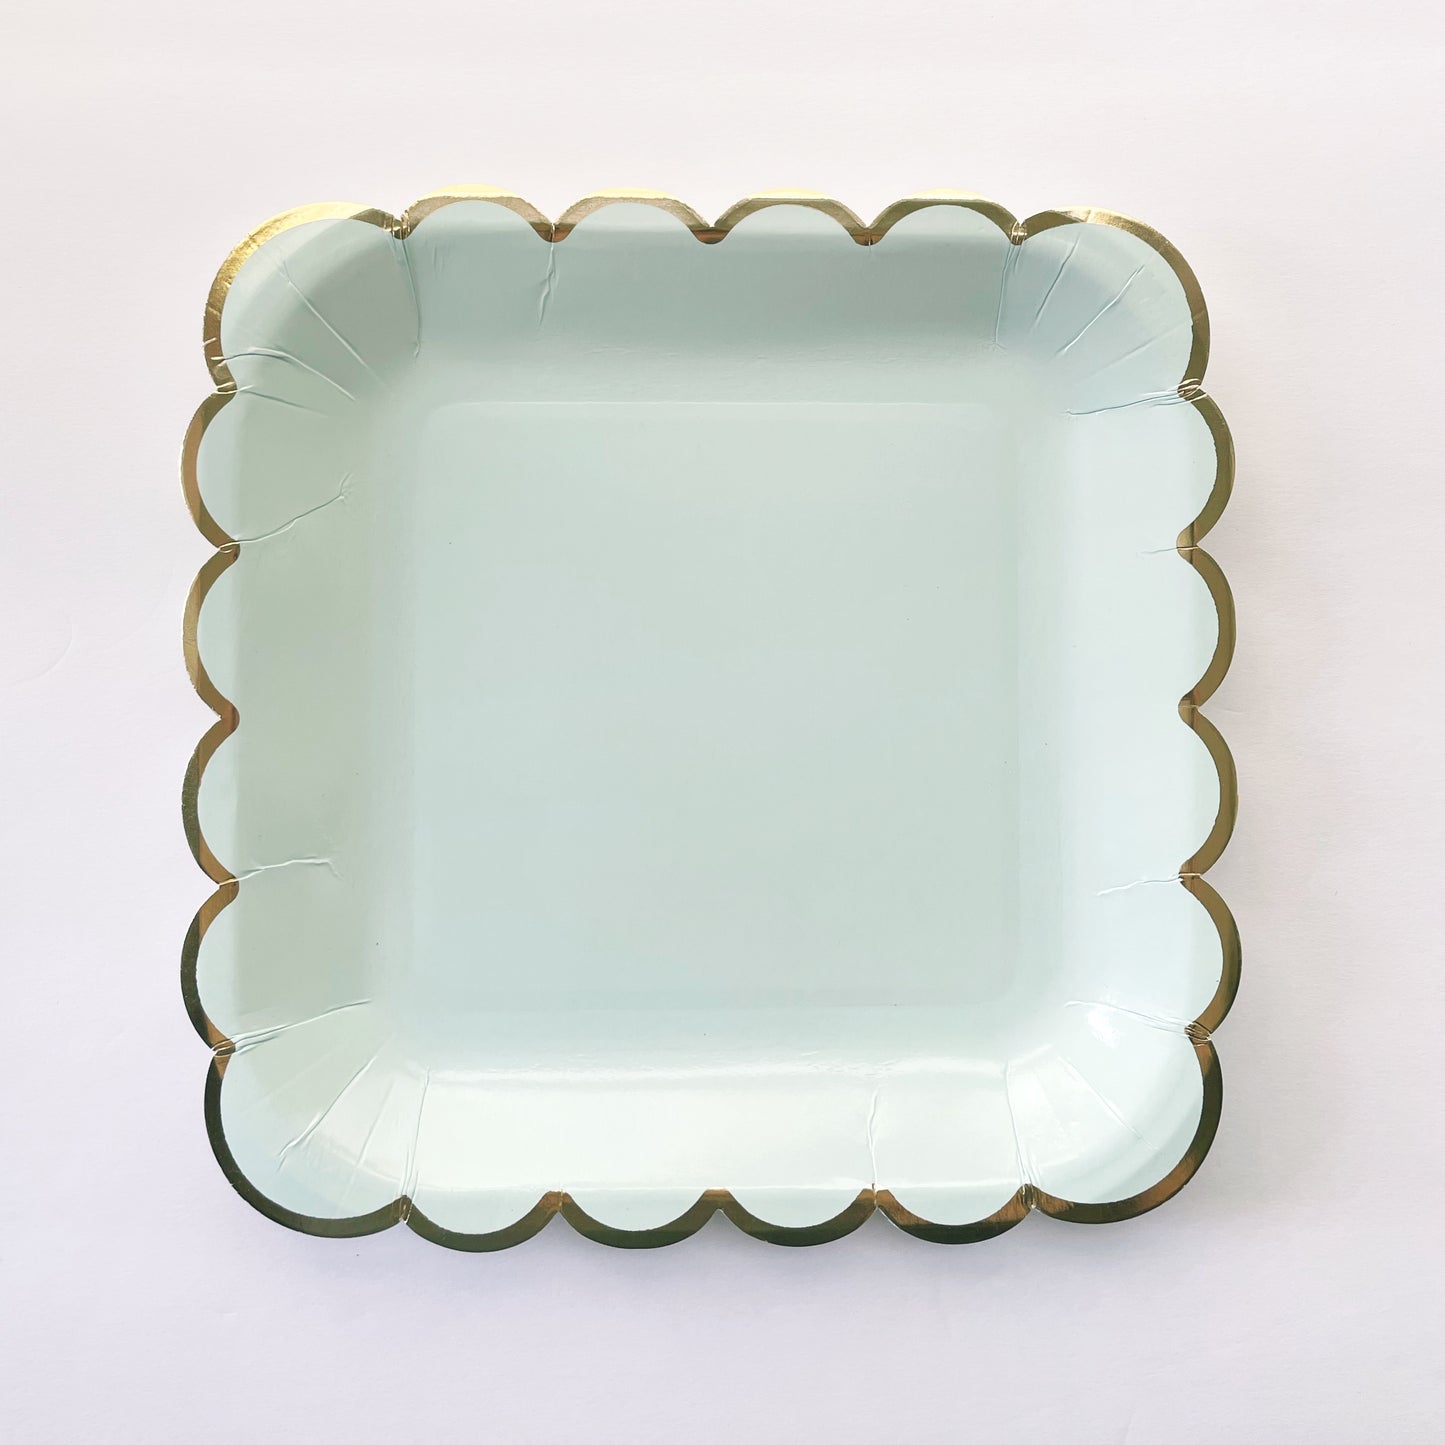 The large paper party plates are in the shape of a square. The plates are a pale pastel blue colour with gold foil scalloped trim.